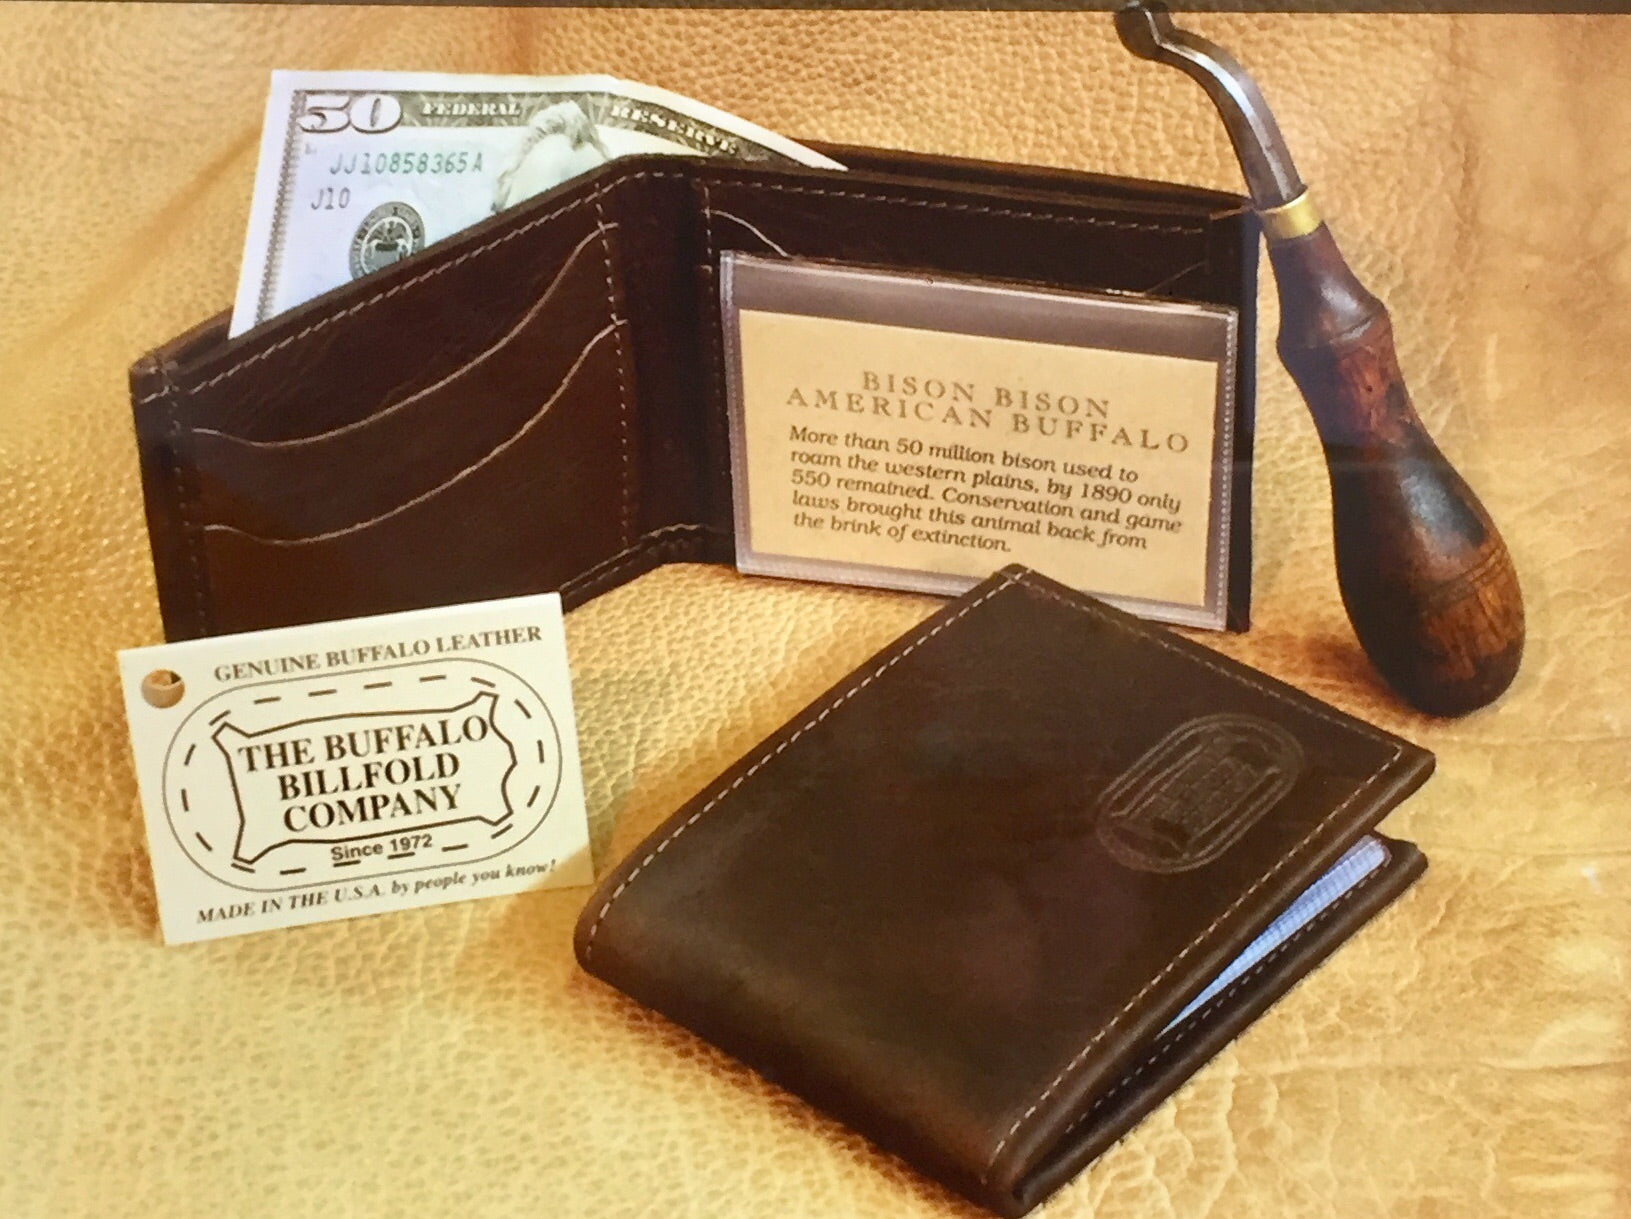 Leather Wallets for Men  The Real Leather Company